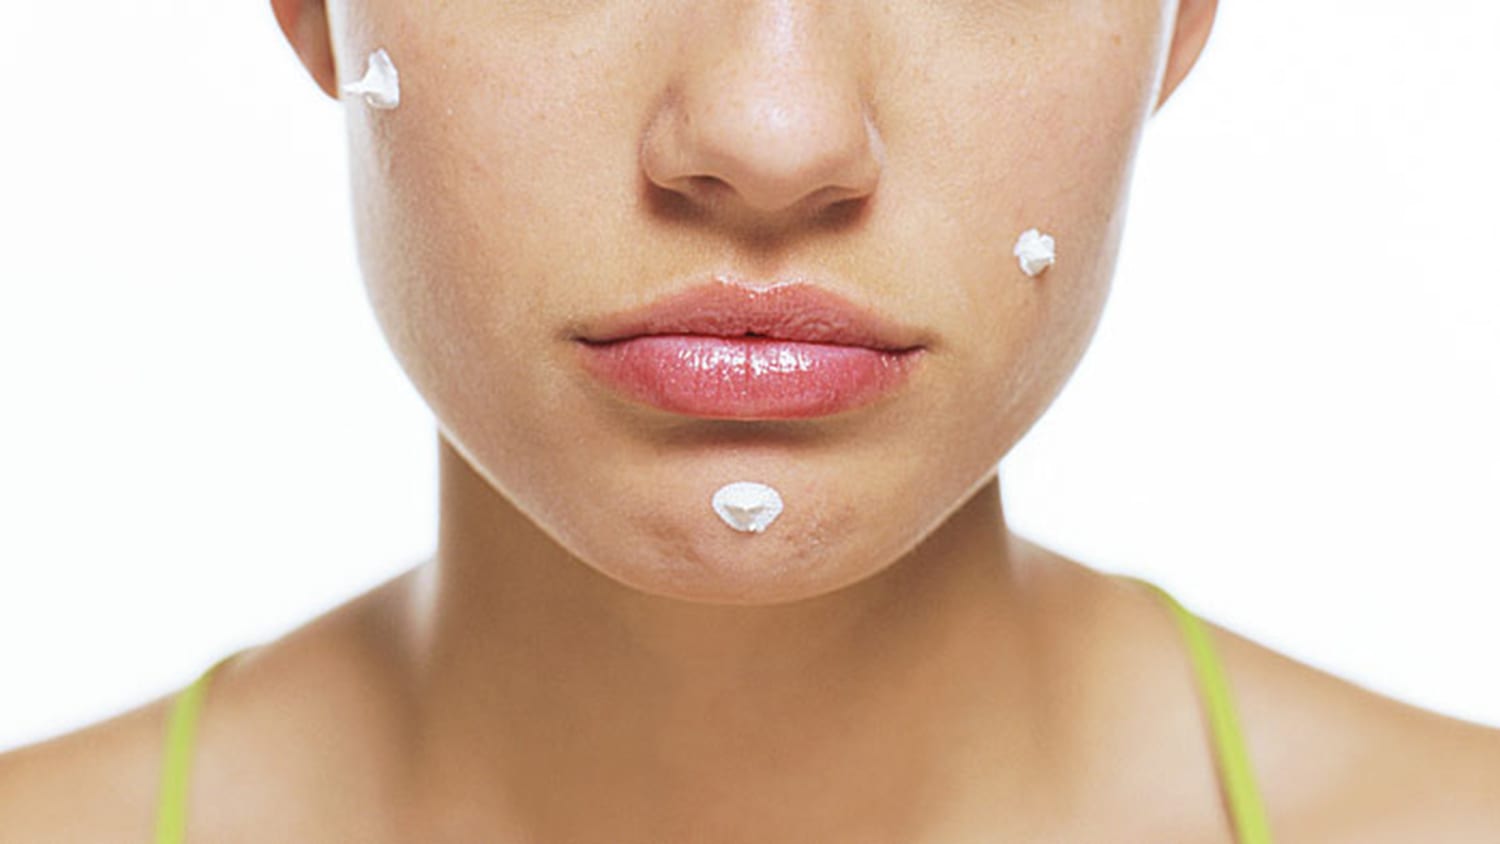 How to get rid of acne: Easy home remedies, clearskin 